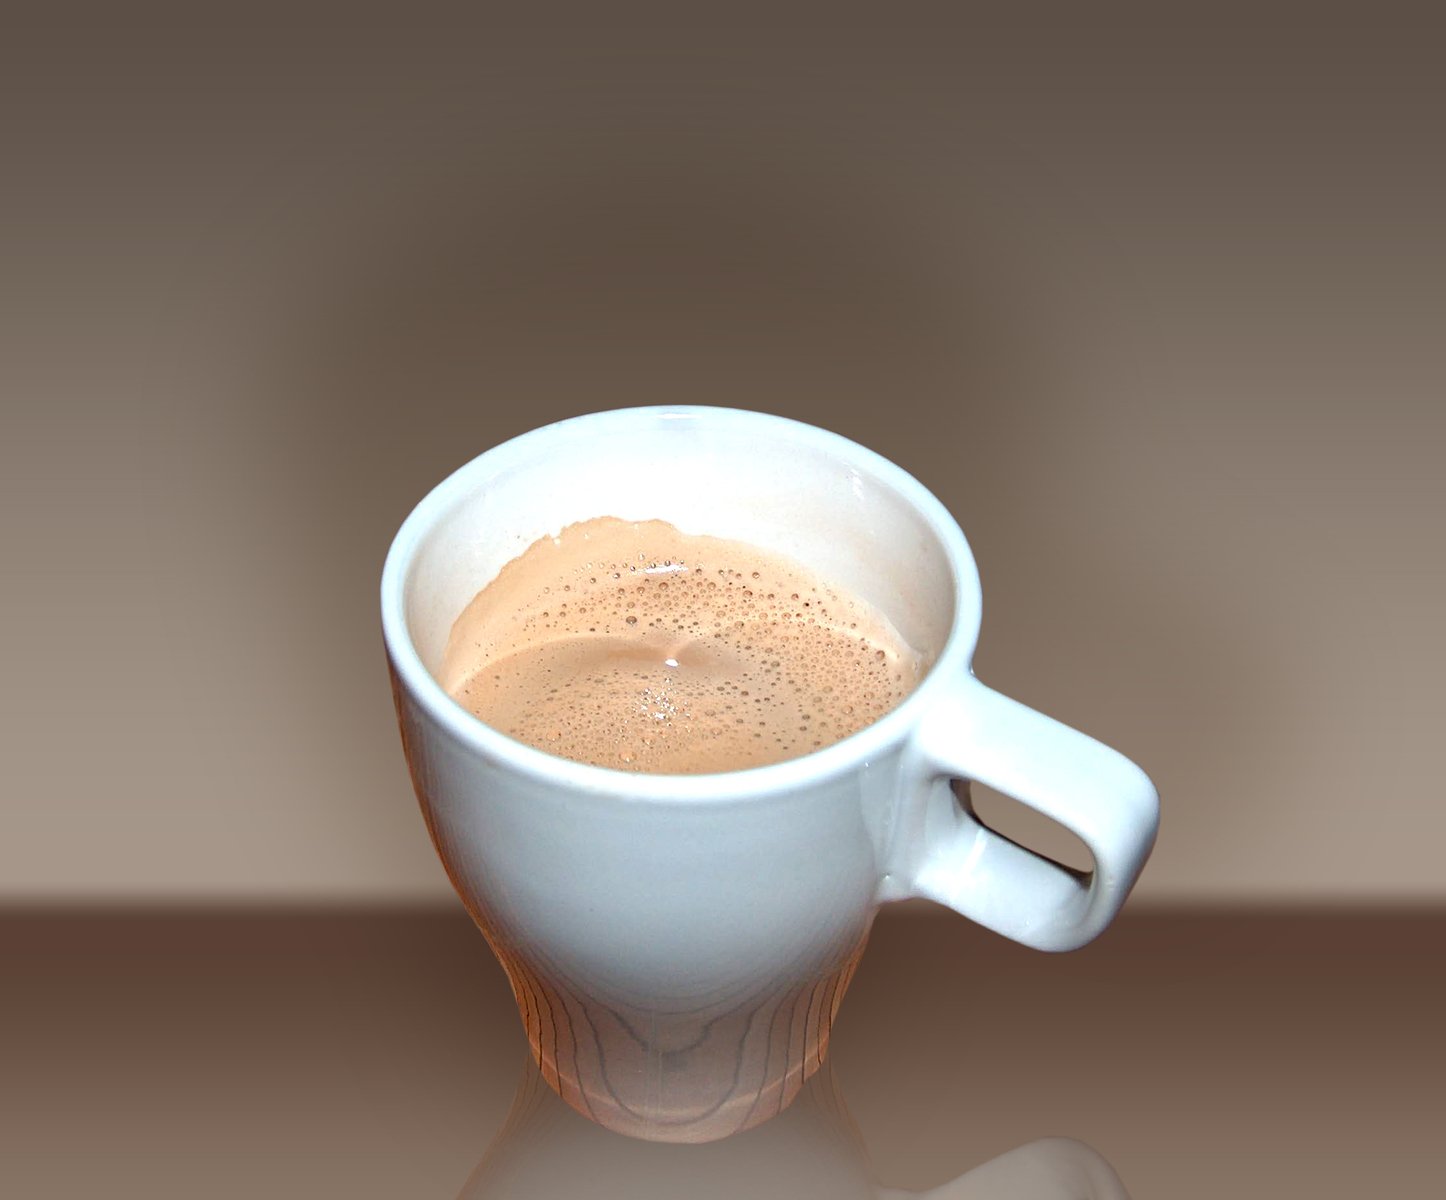 a mug filled with brown liquid next to a white object